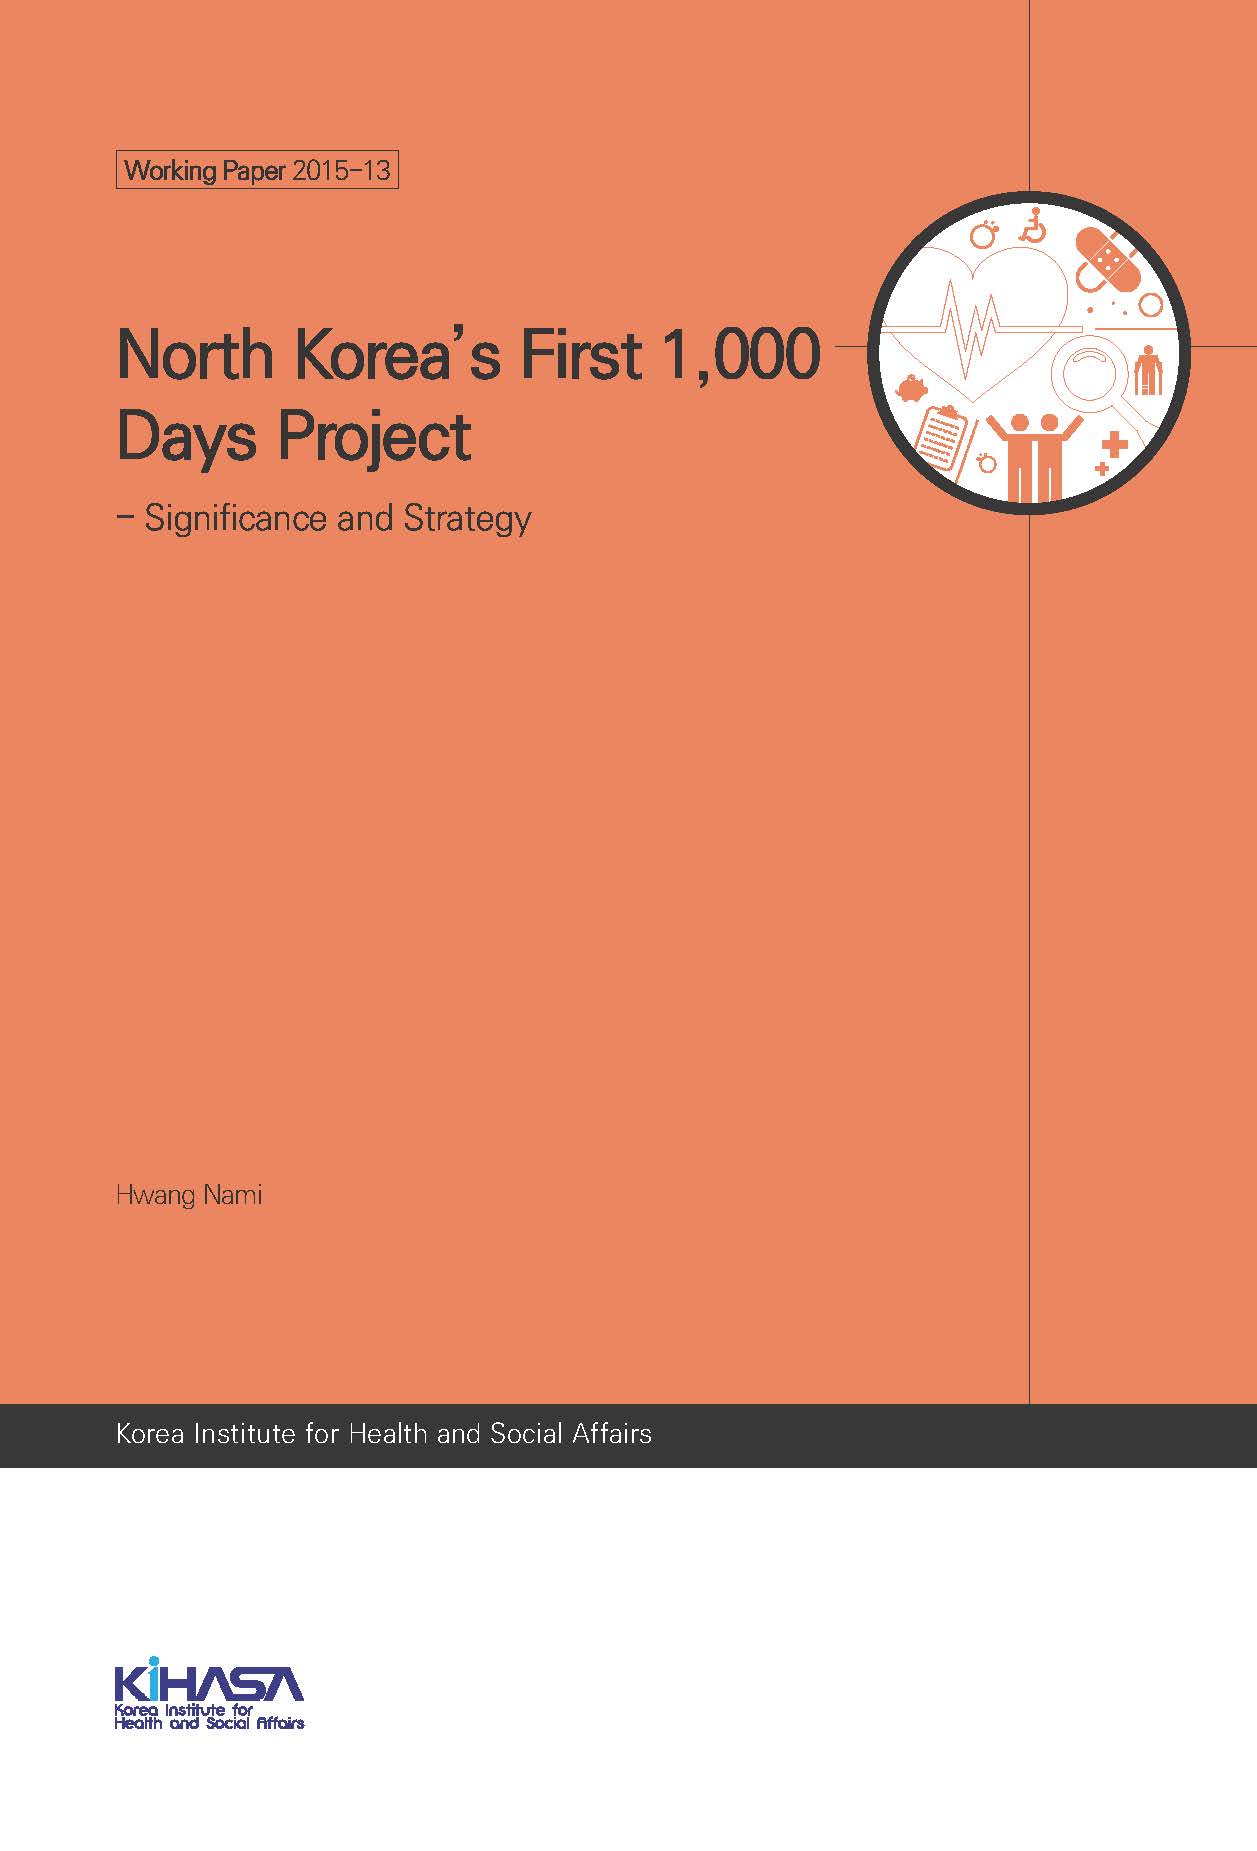 North Korea’s First 1,000 Days Project - Significance and Strategy